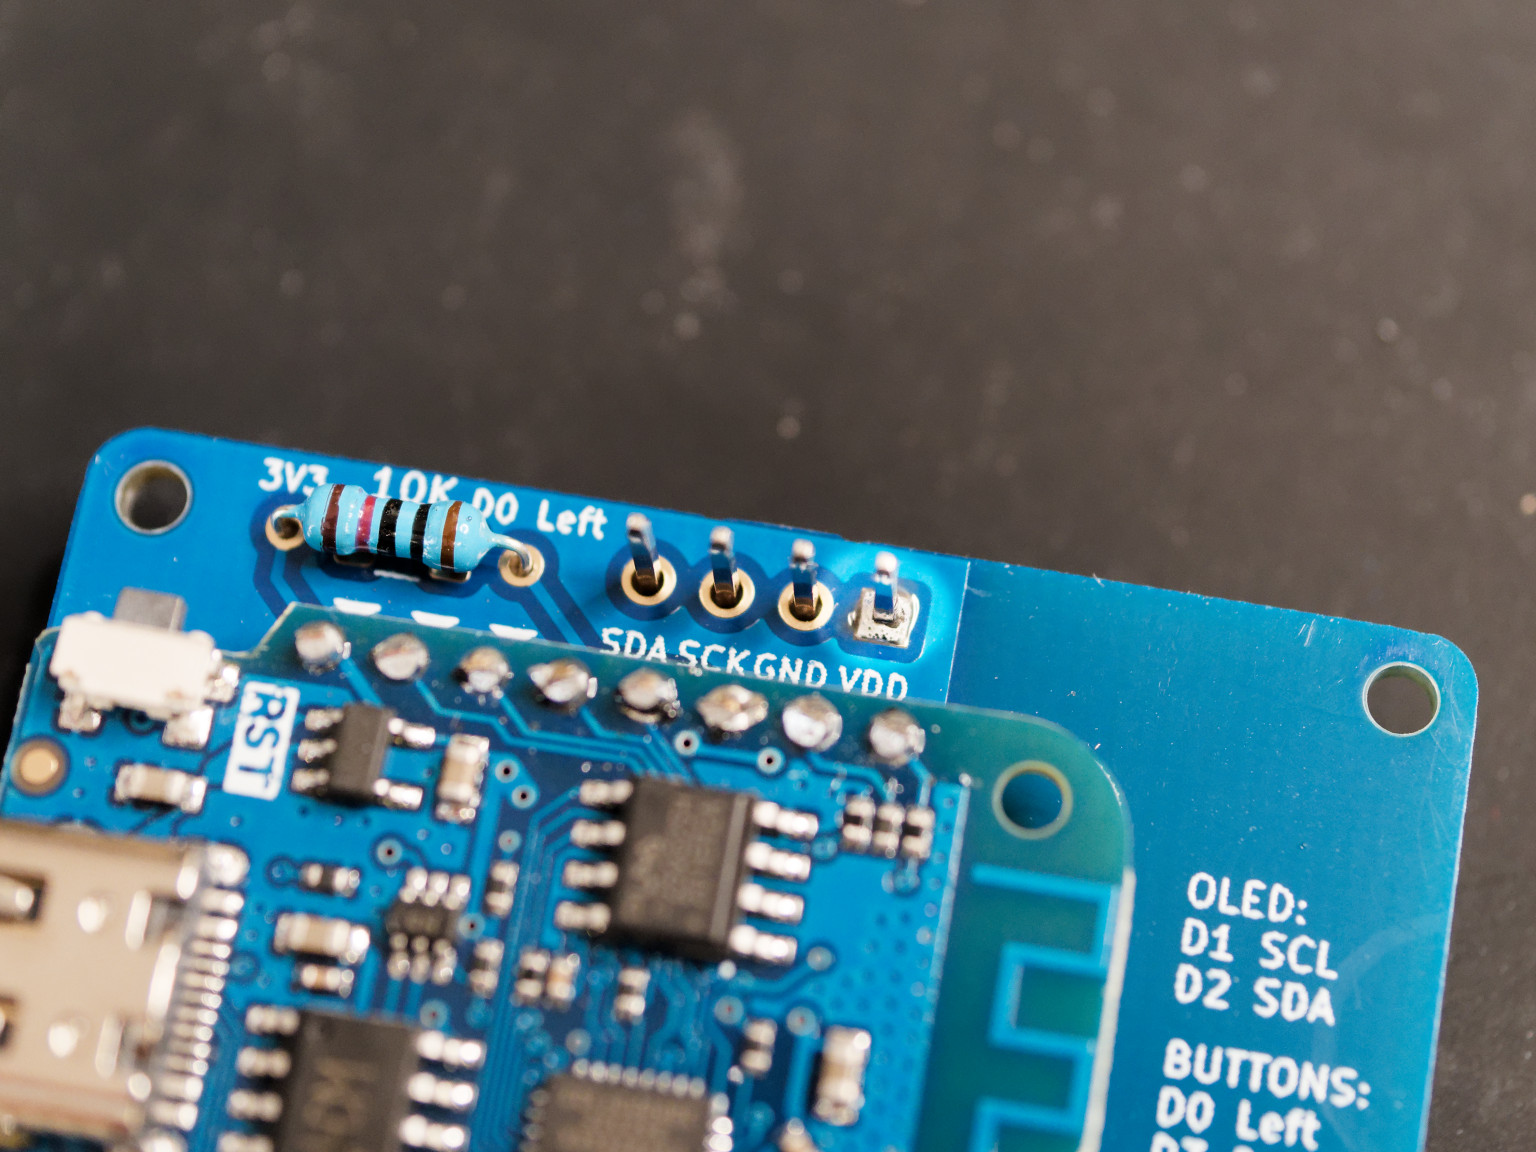 One pin of OLED display soldered